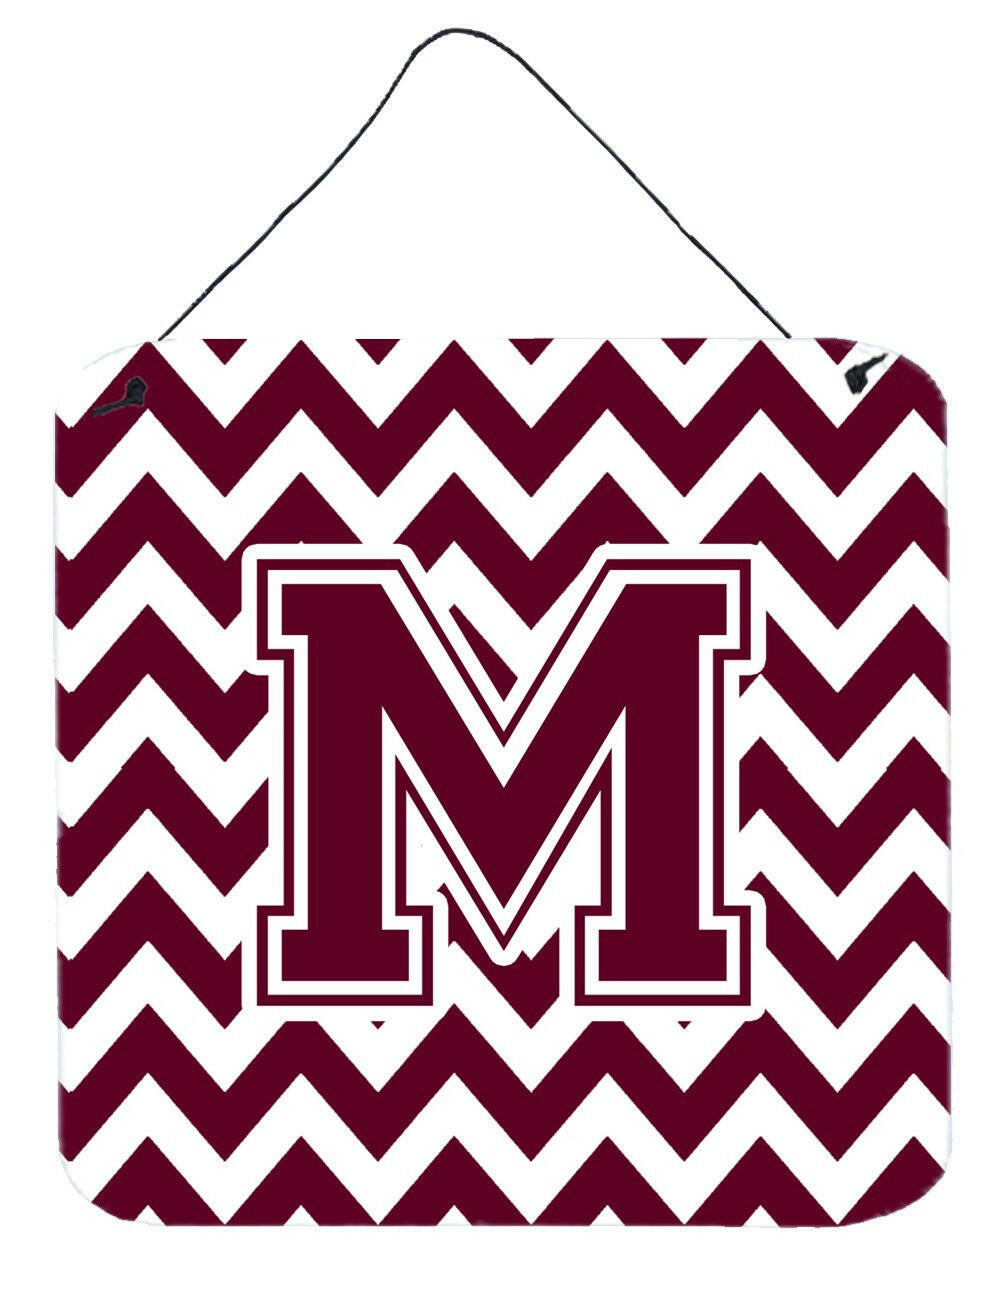 Letter M Chevron Maroon and White  Wall or Door Hanging Prints CJ1051-MDS66 by Caroline's Treasures